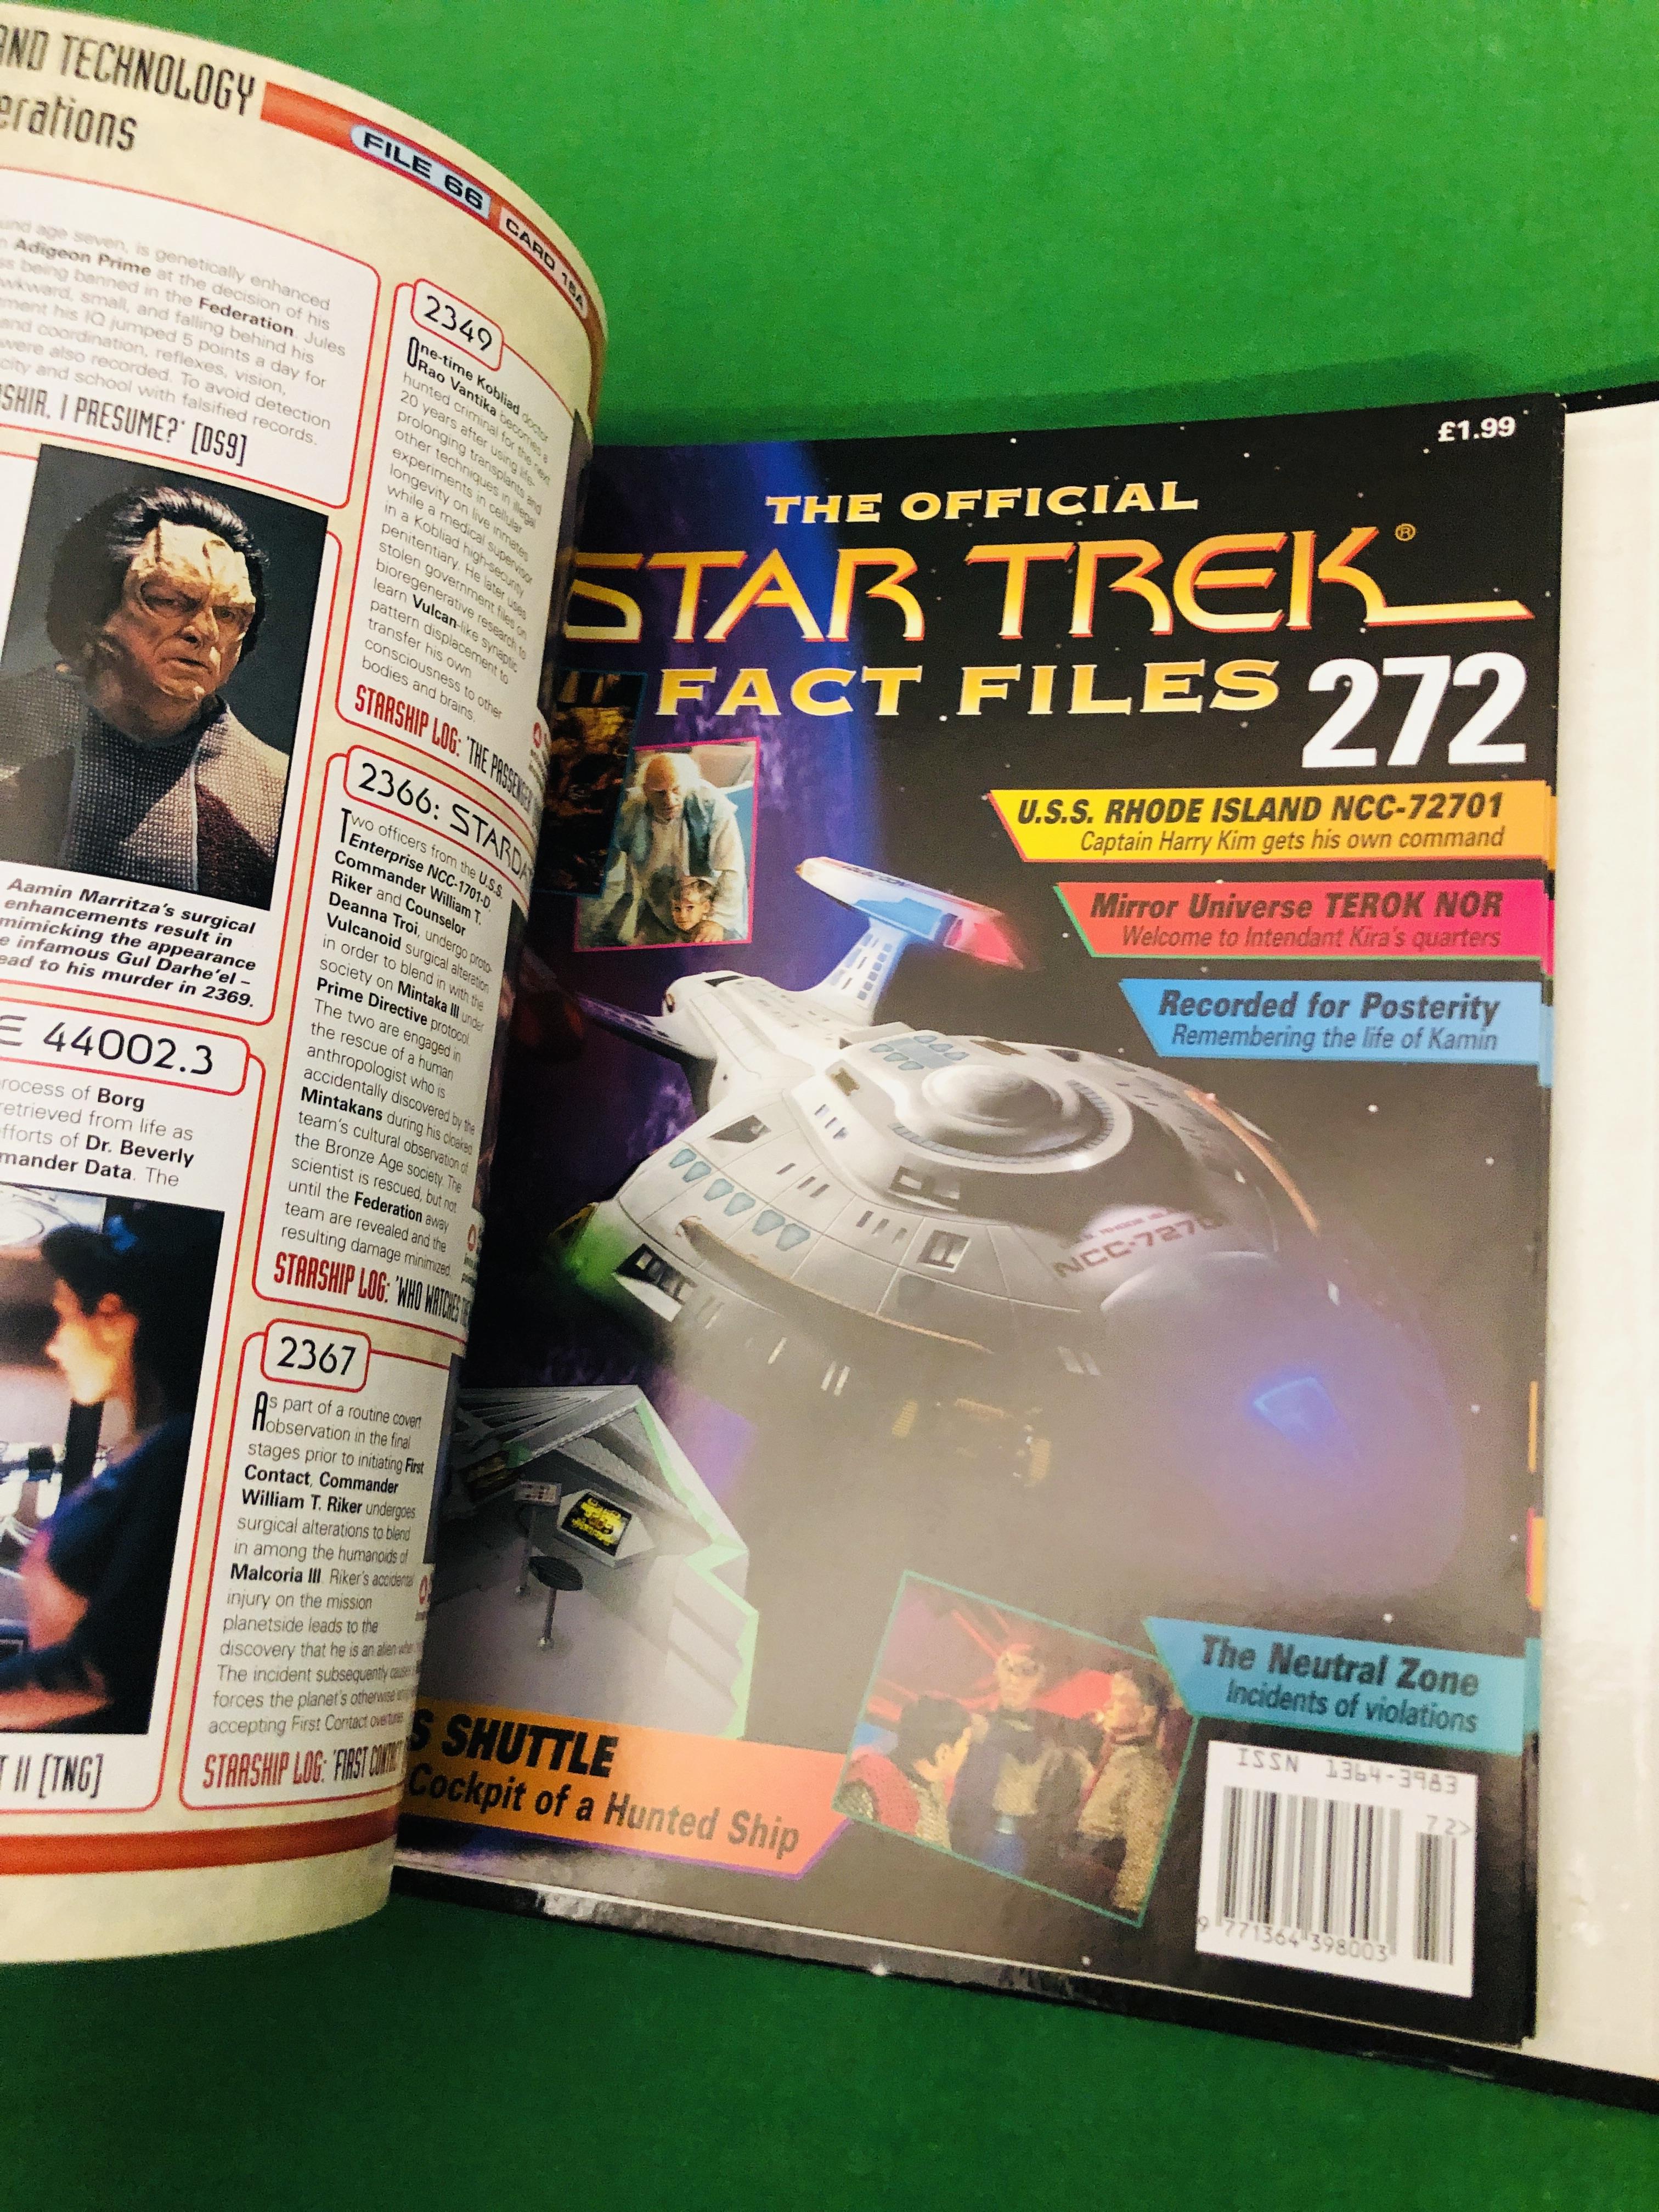 A LARGE COLLECTION OF STAR TREK FACT FILES ALONG WITH OTHER STAR TREK MAGAZINES, THE FINAL FRONTIER, - Image 3 of 7